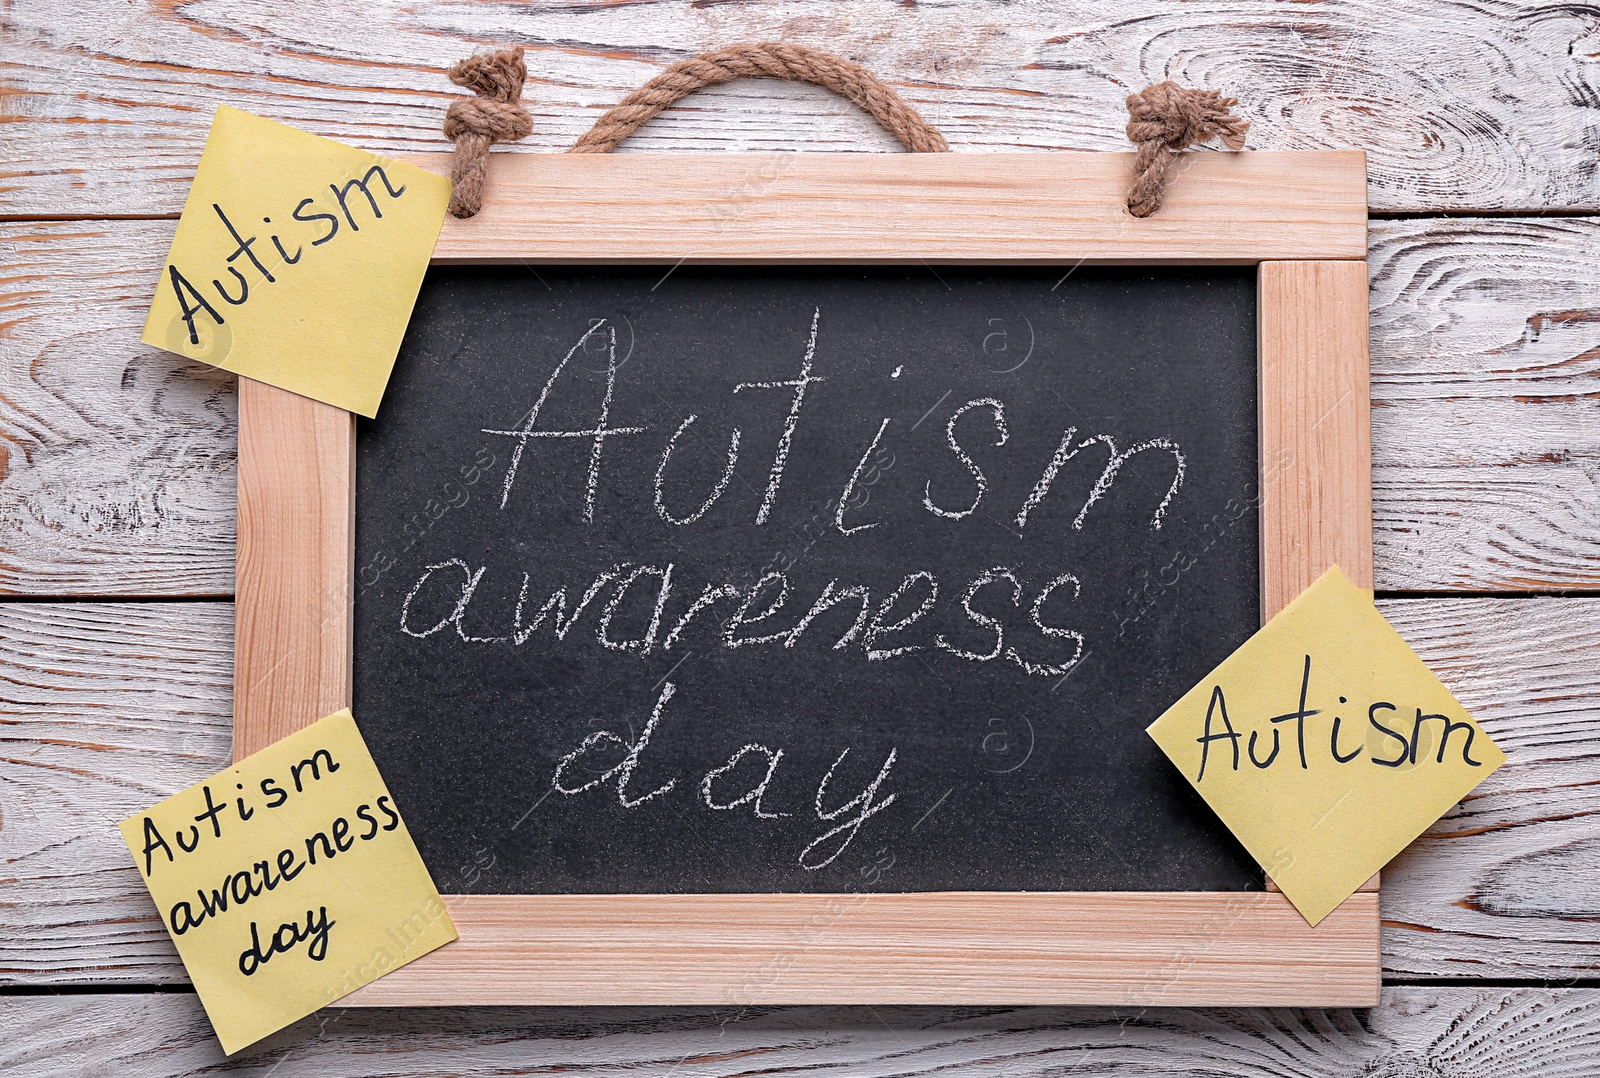 Photo of Chalkboard with phrase "Autism awareness day" on wooden background